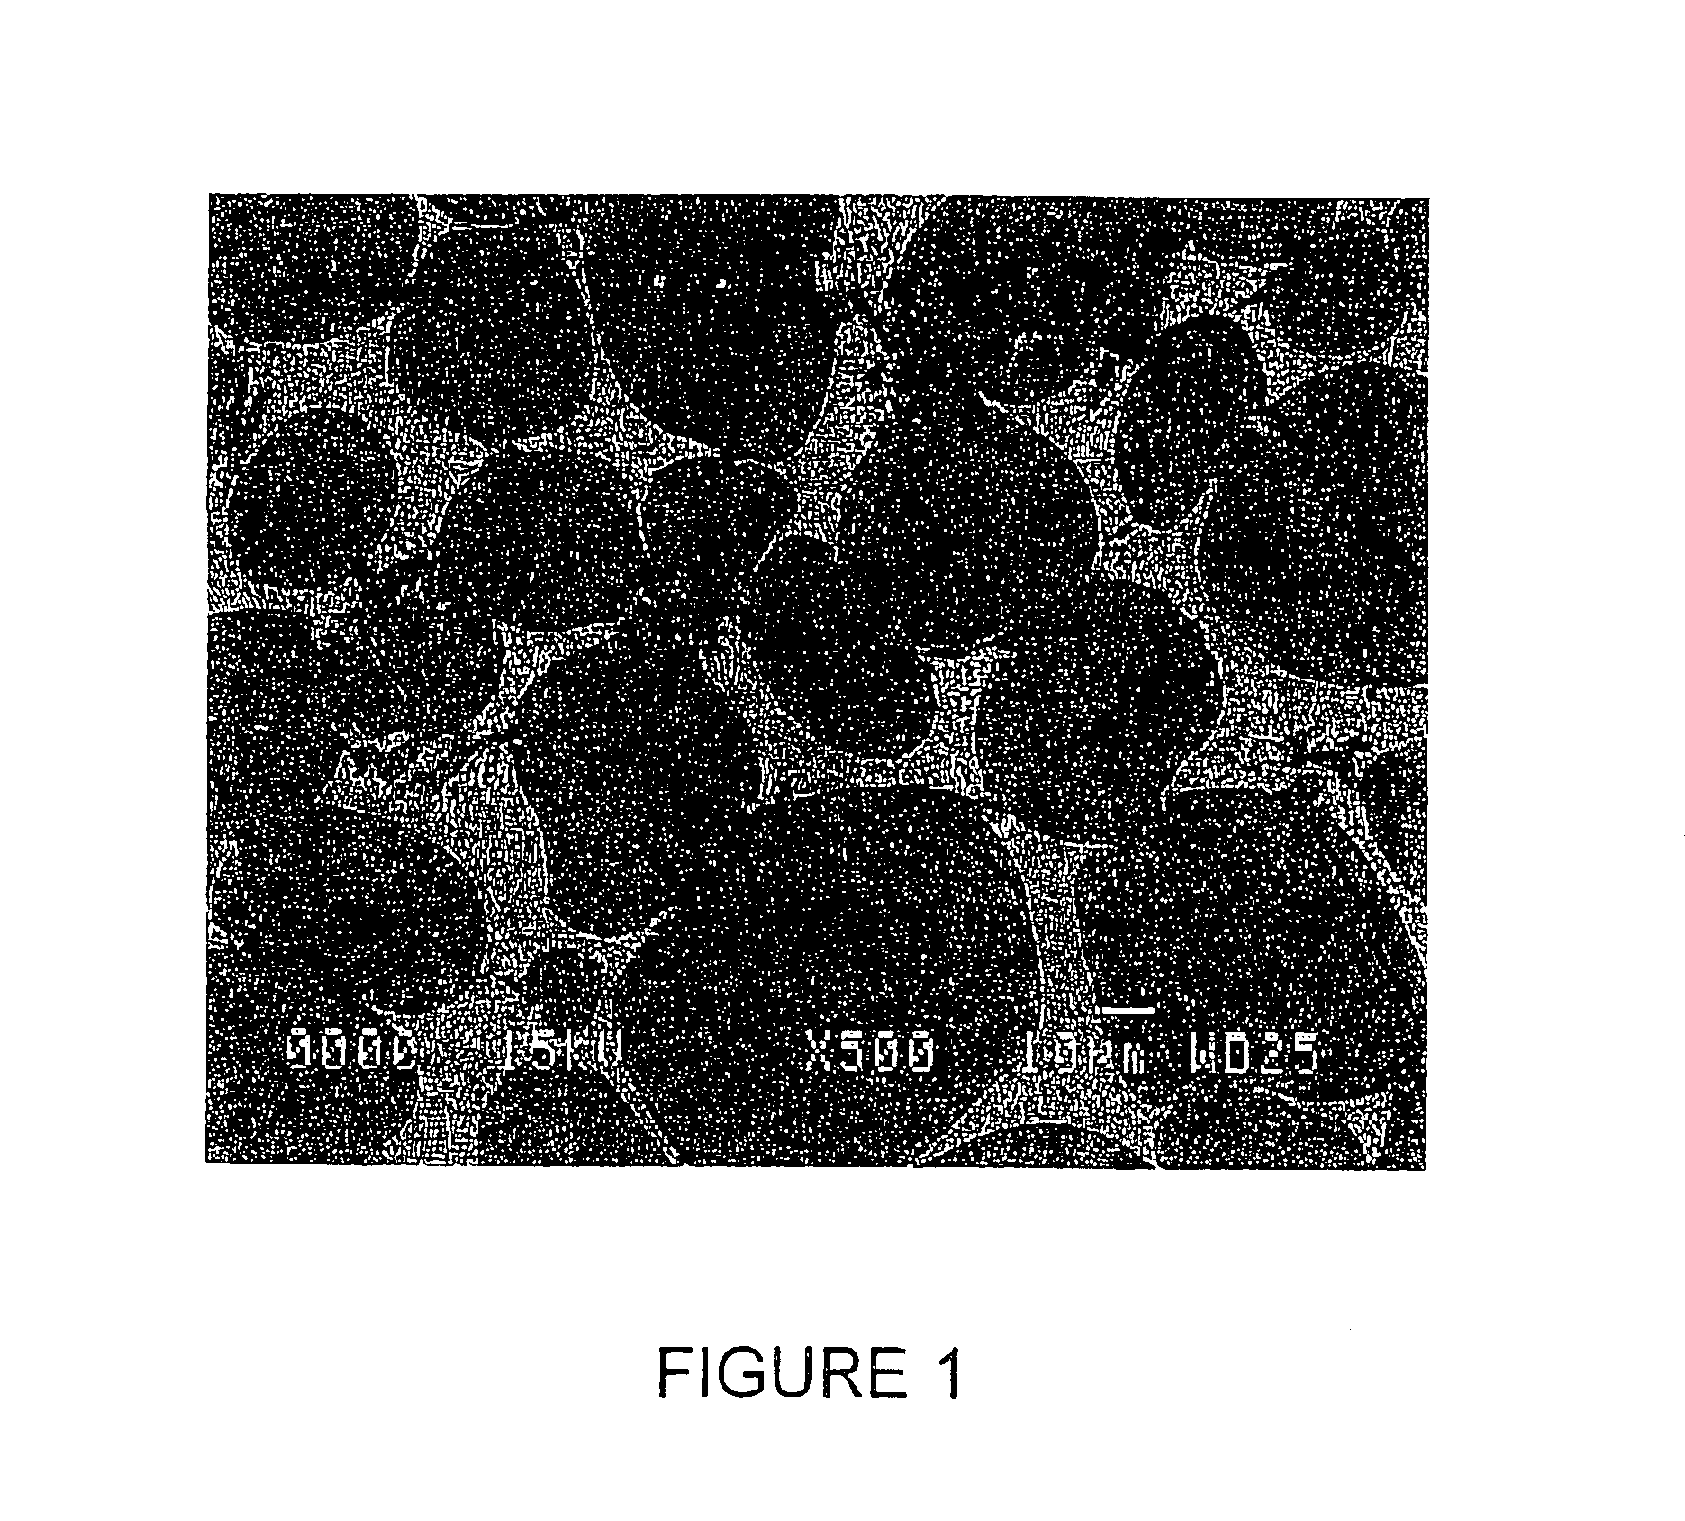 Method for oxidizing treatment of steel plant slag to obtain cement-based materials